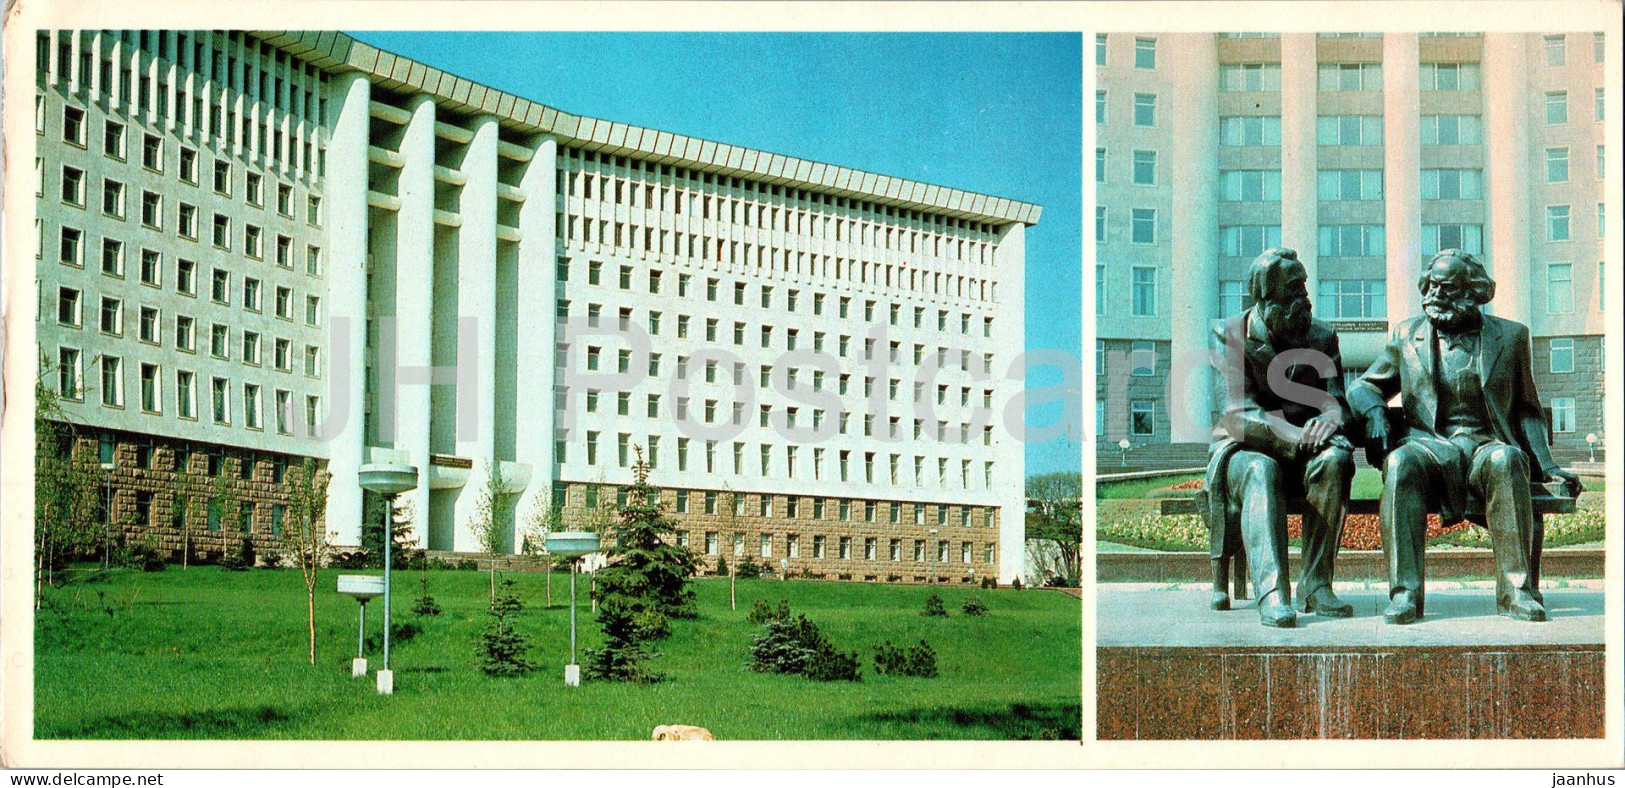 Chisinau - Monument To Marx And Engels - Central Committe Of The Communist Party Building - 1980 - Moldova USSR - Unused - Moldavie